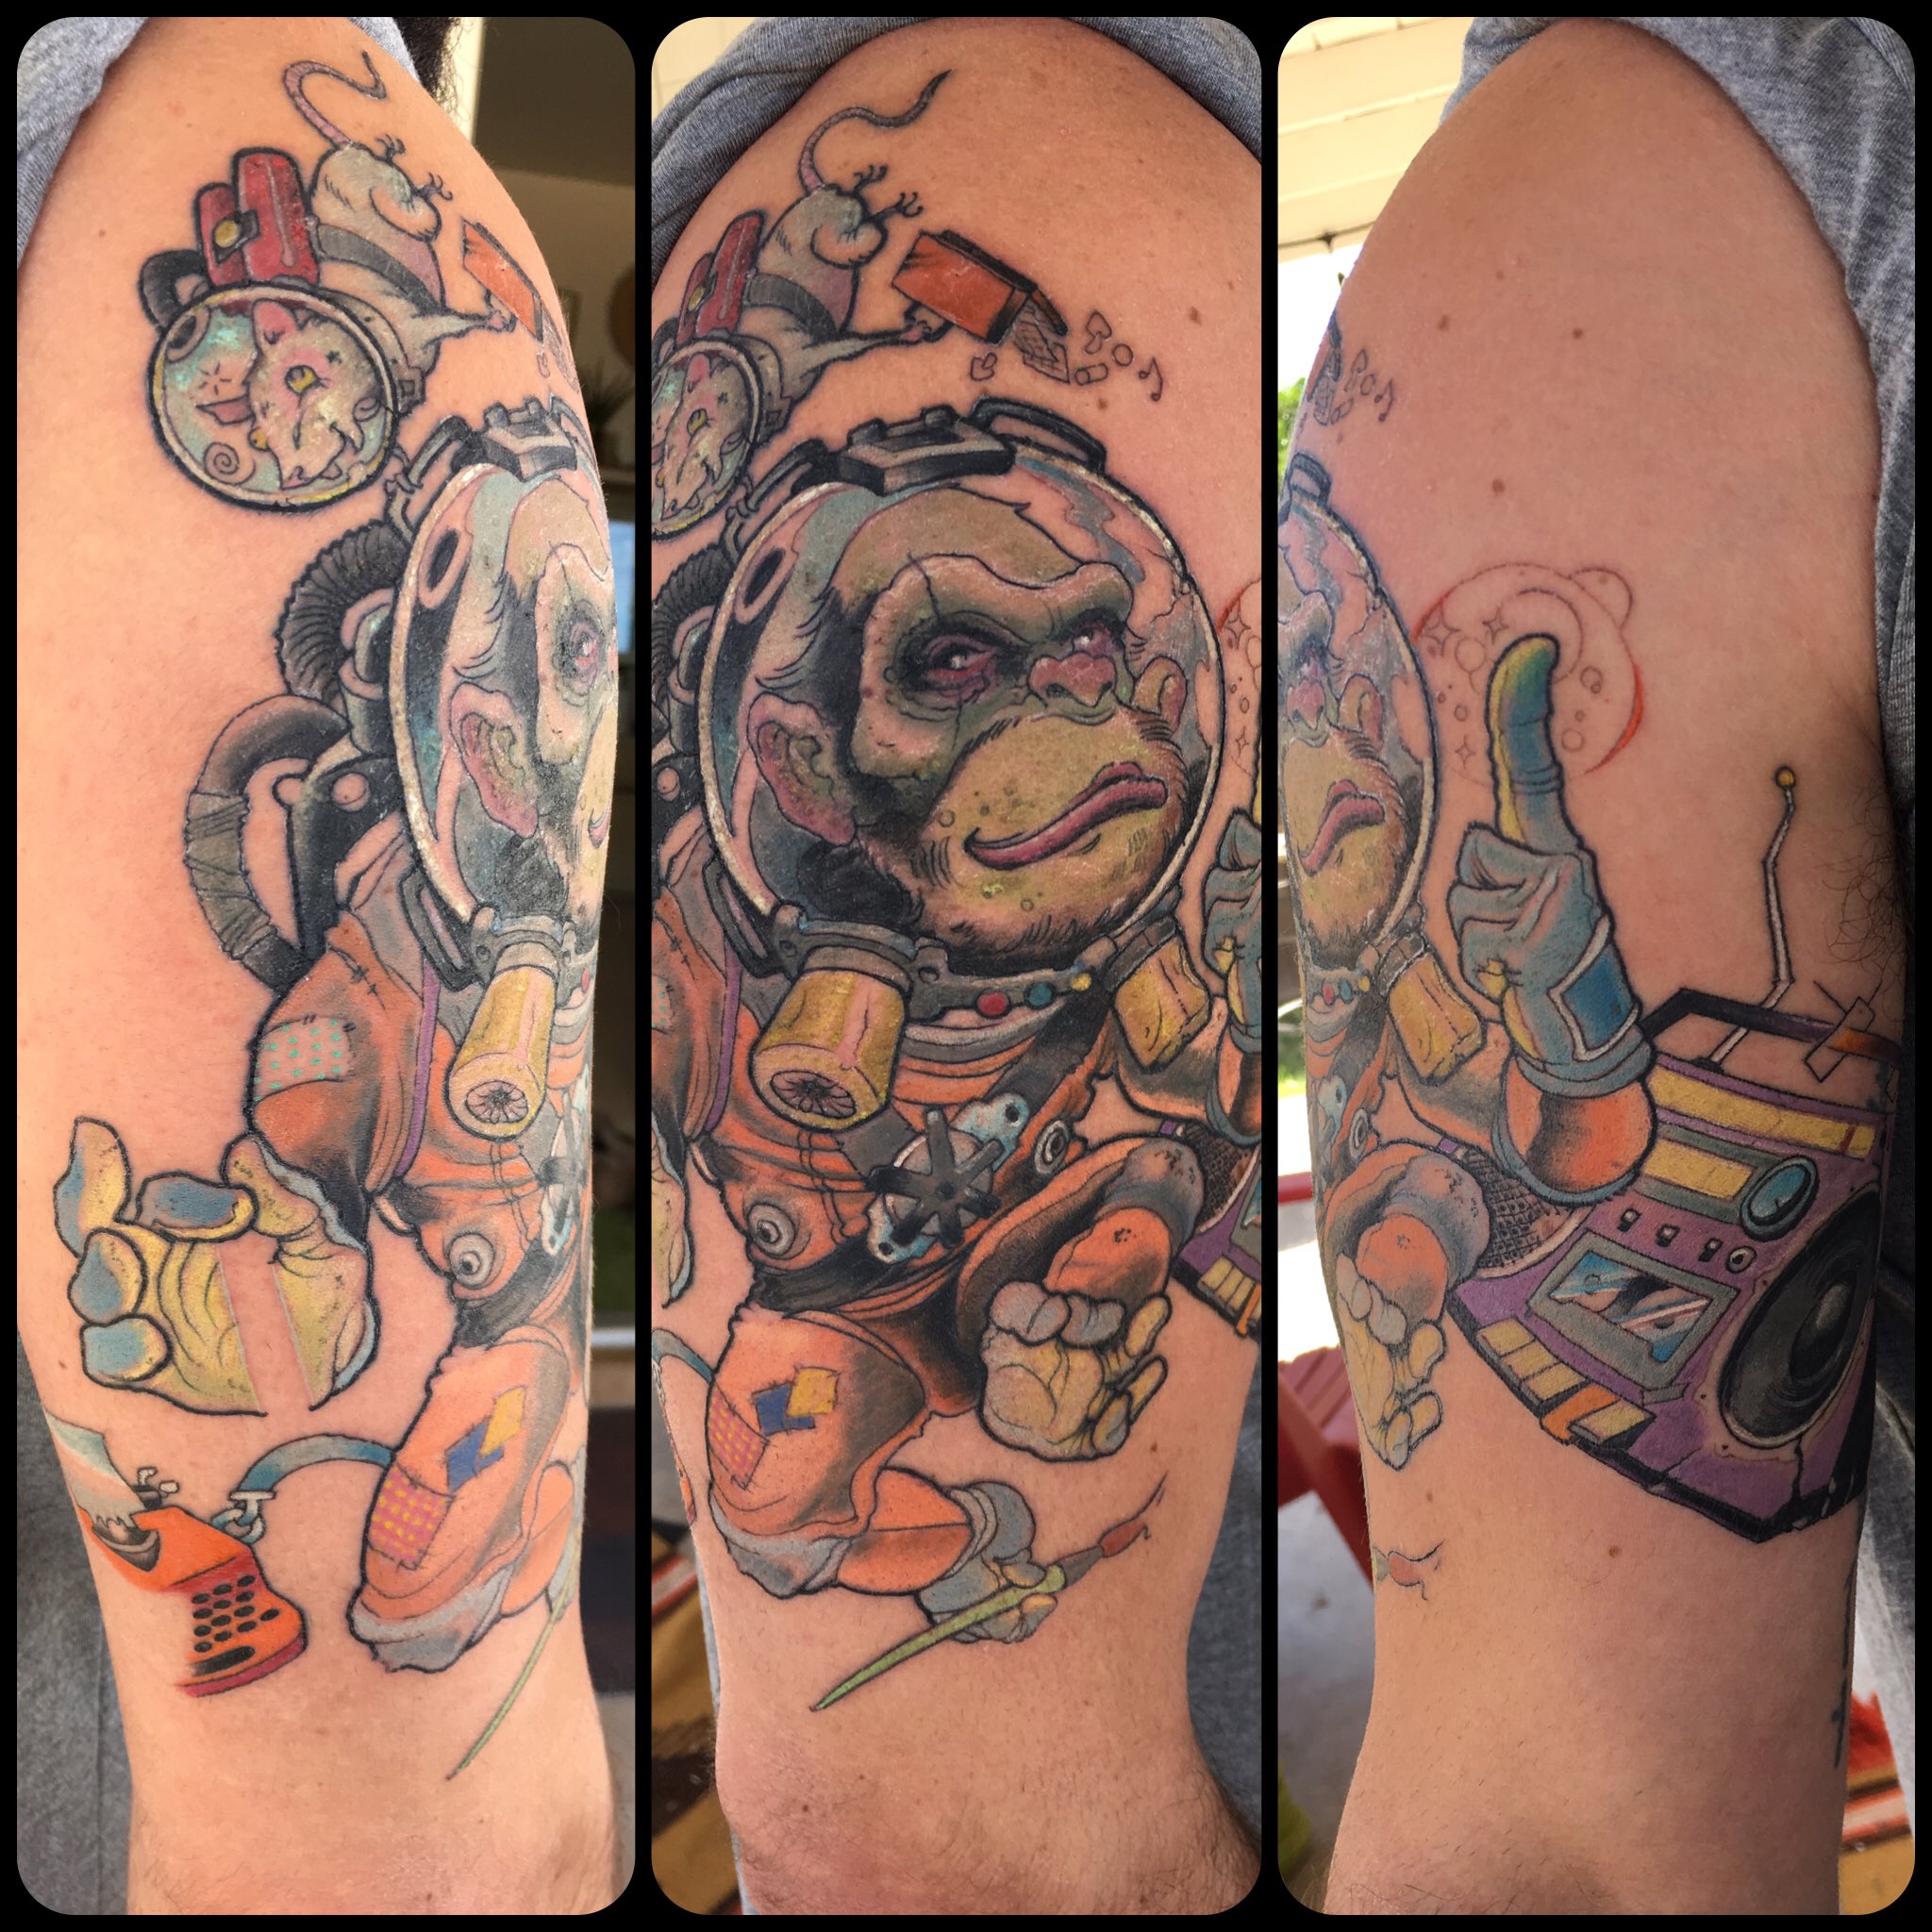 Space Monkey tattoo on the right thigh referenced from